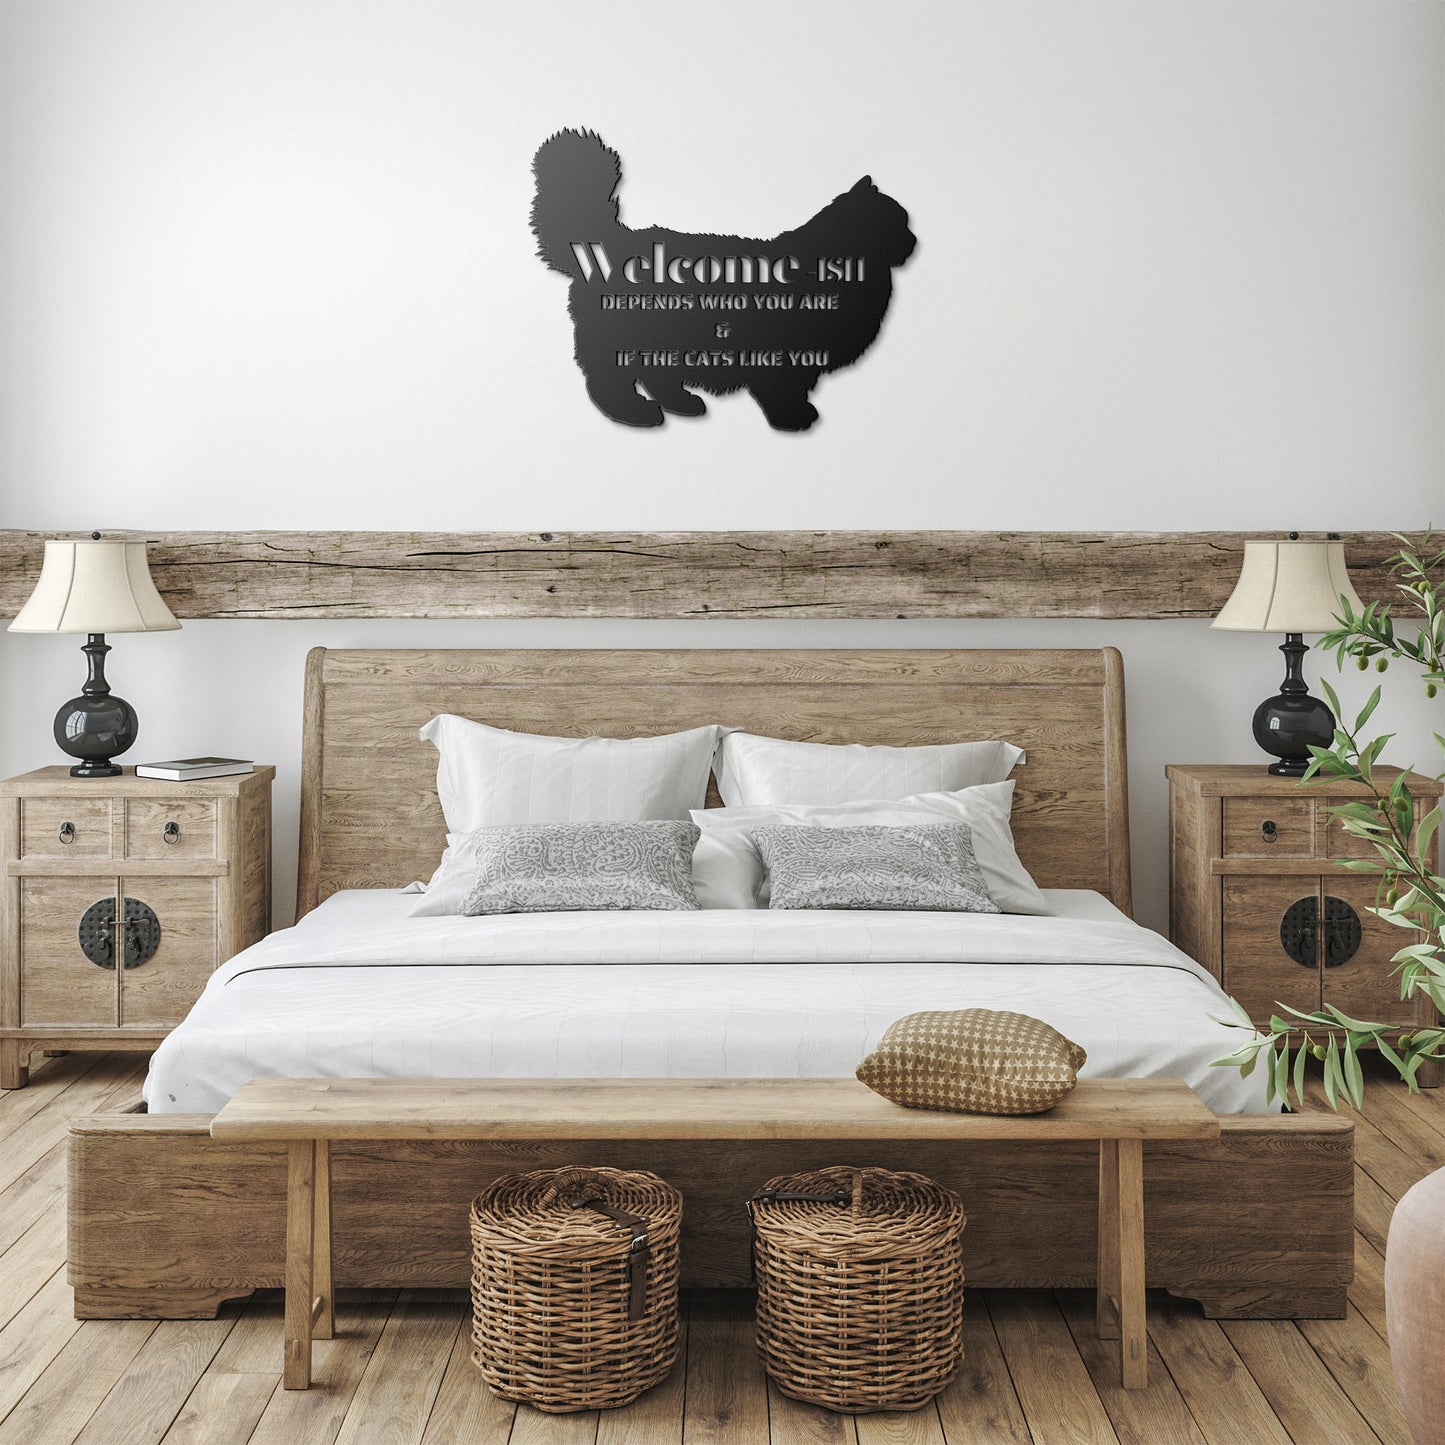 Ragdoll Whisker Welcome: The 'Pawsitively Selective' Laser Cut Metal Sign for Discerning Cat Homes